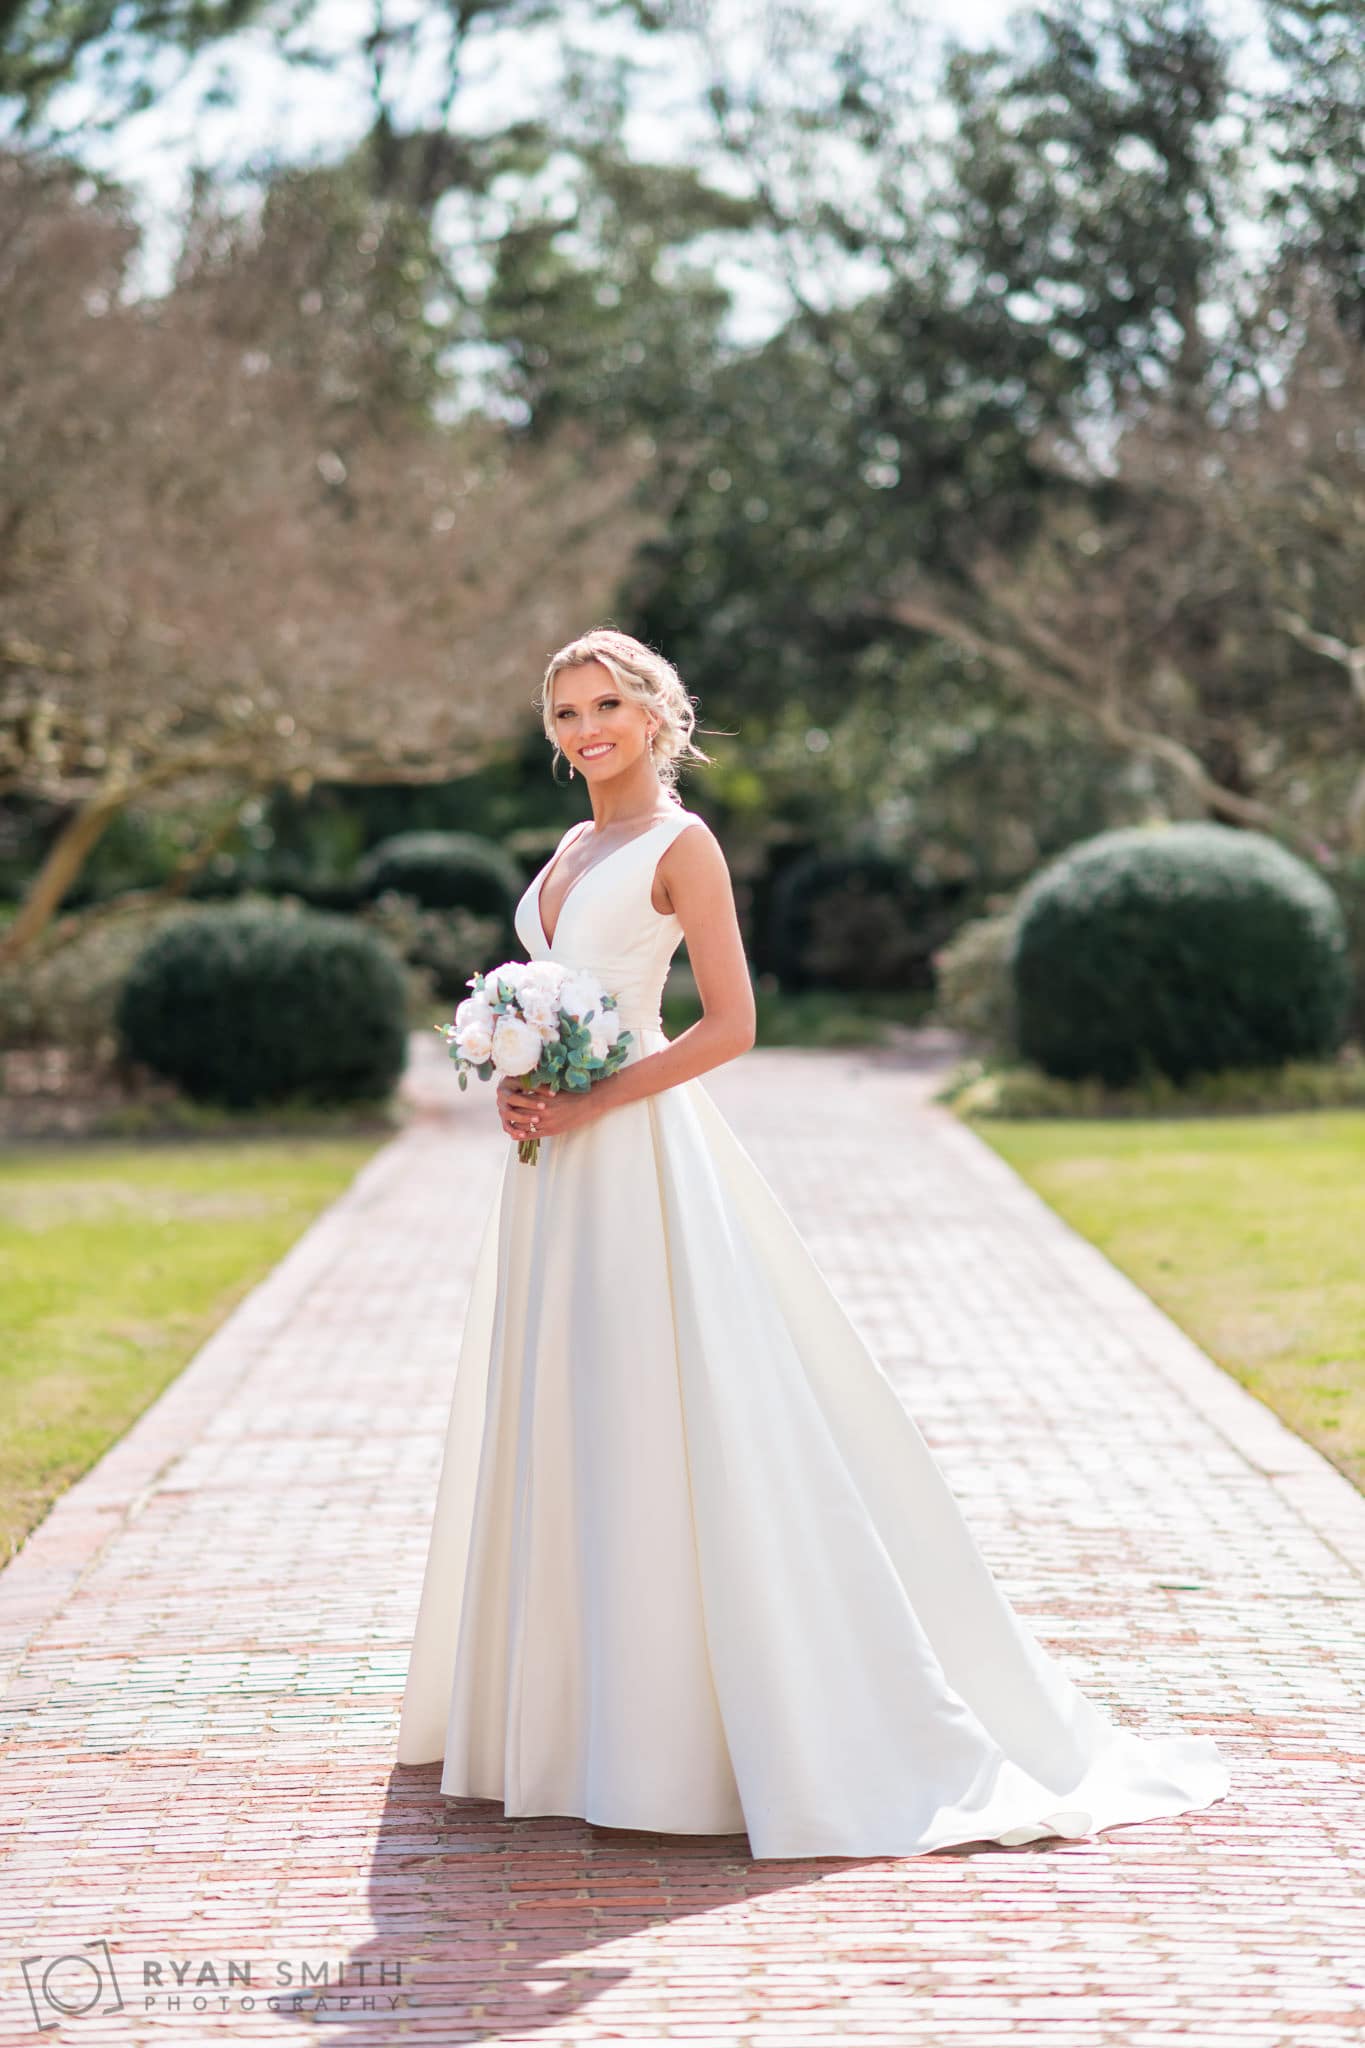 Bridal portraits on the brick walkway behind the clubhouse - Pine Lakes Country Club